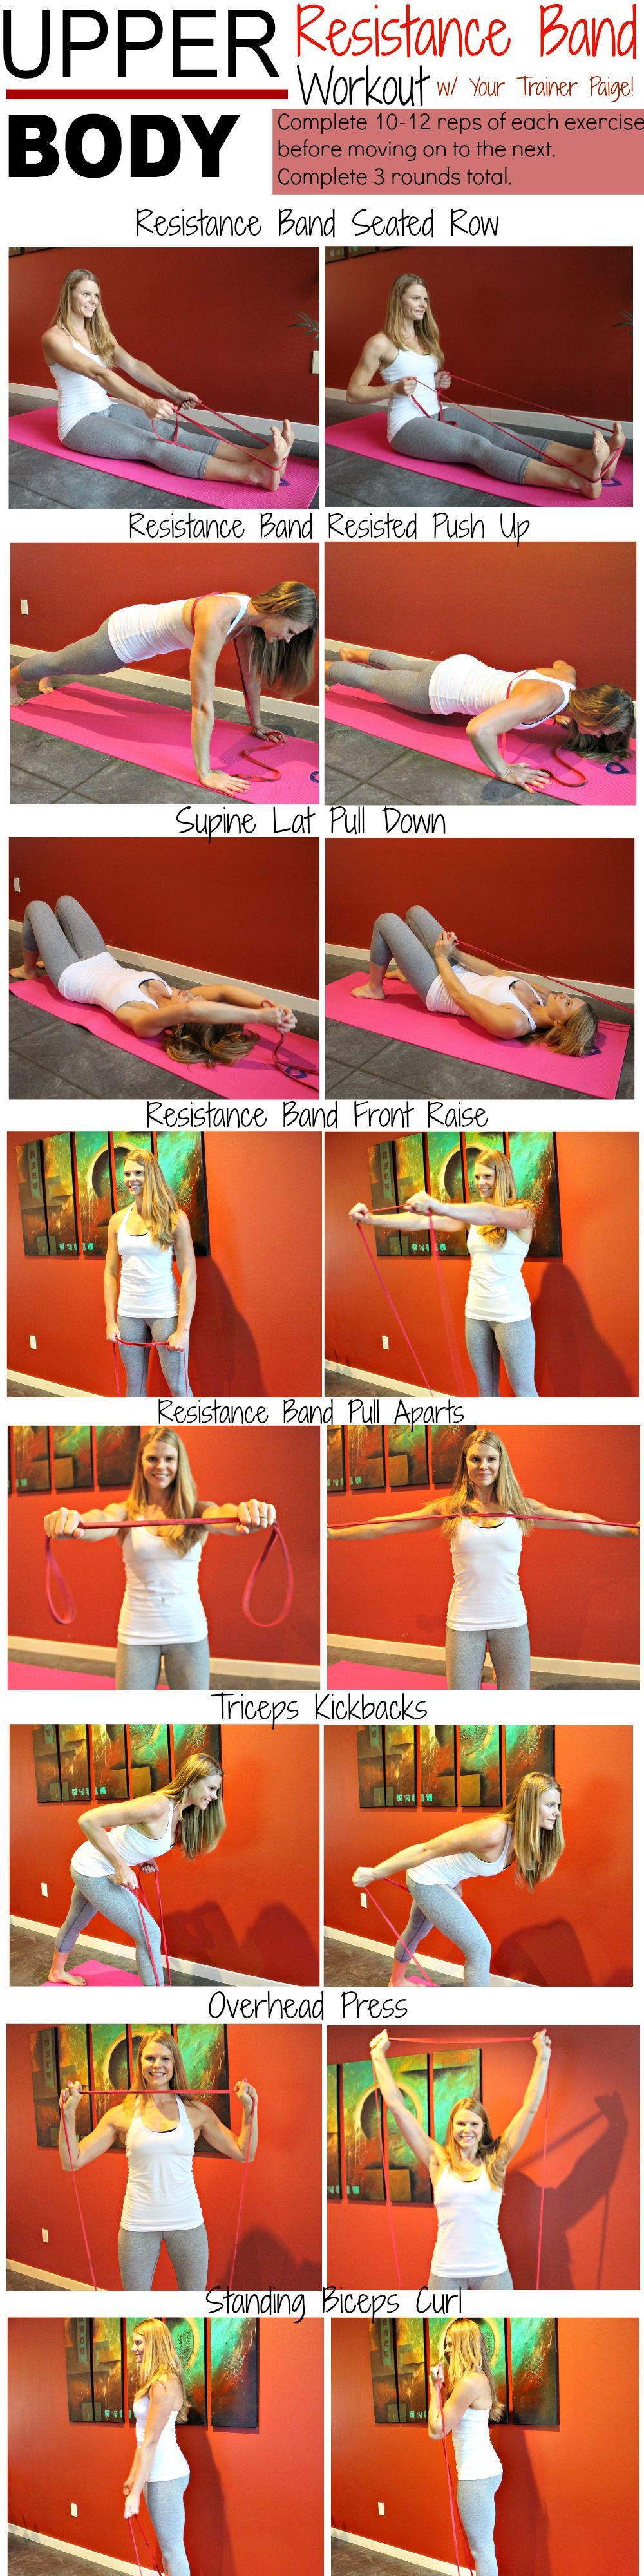 Upper Body Resistance Band